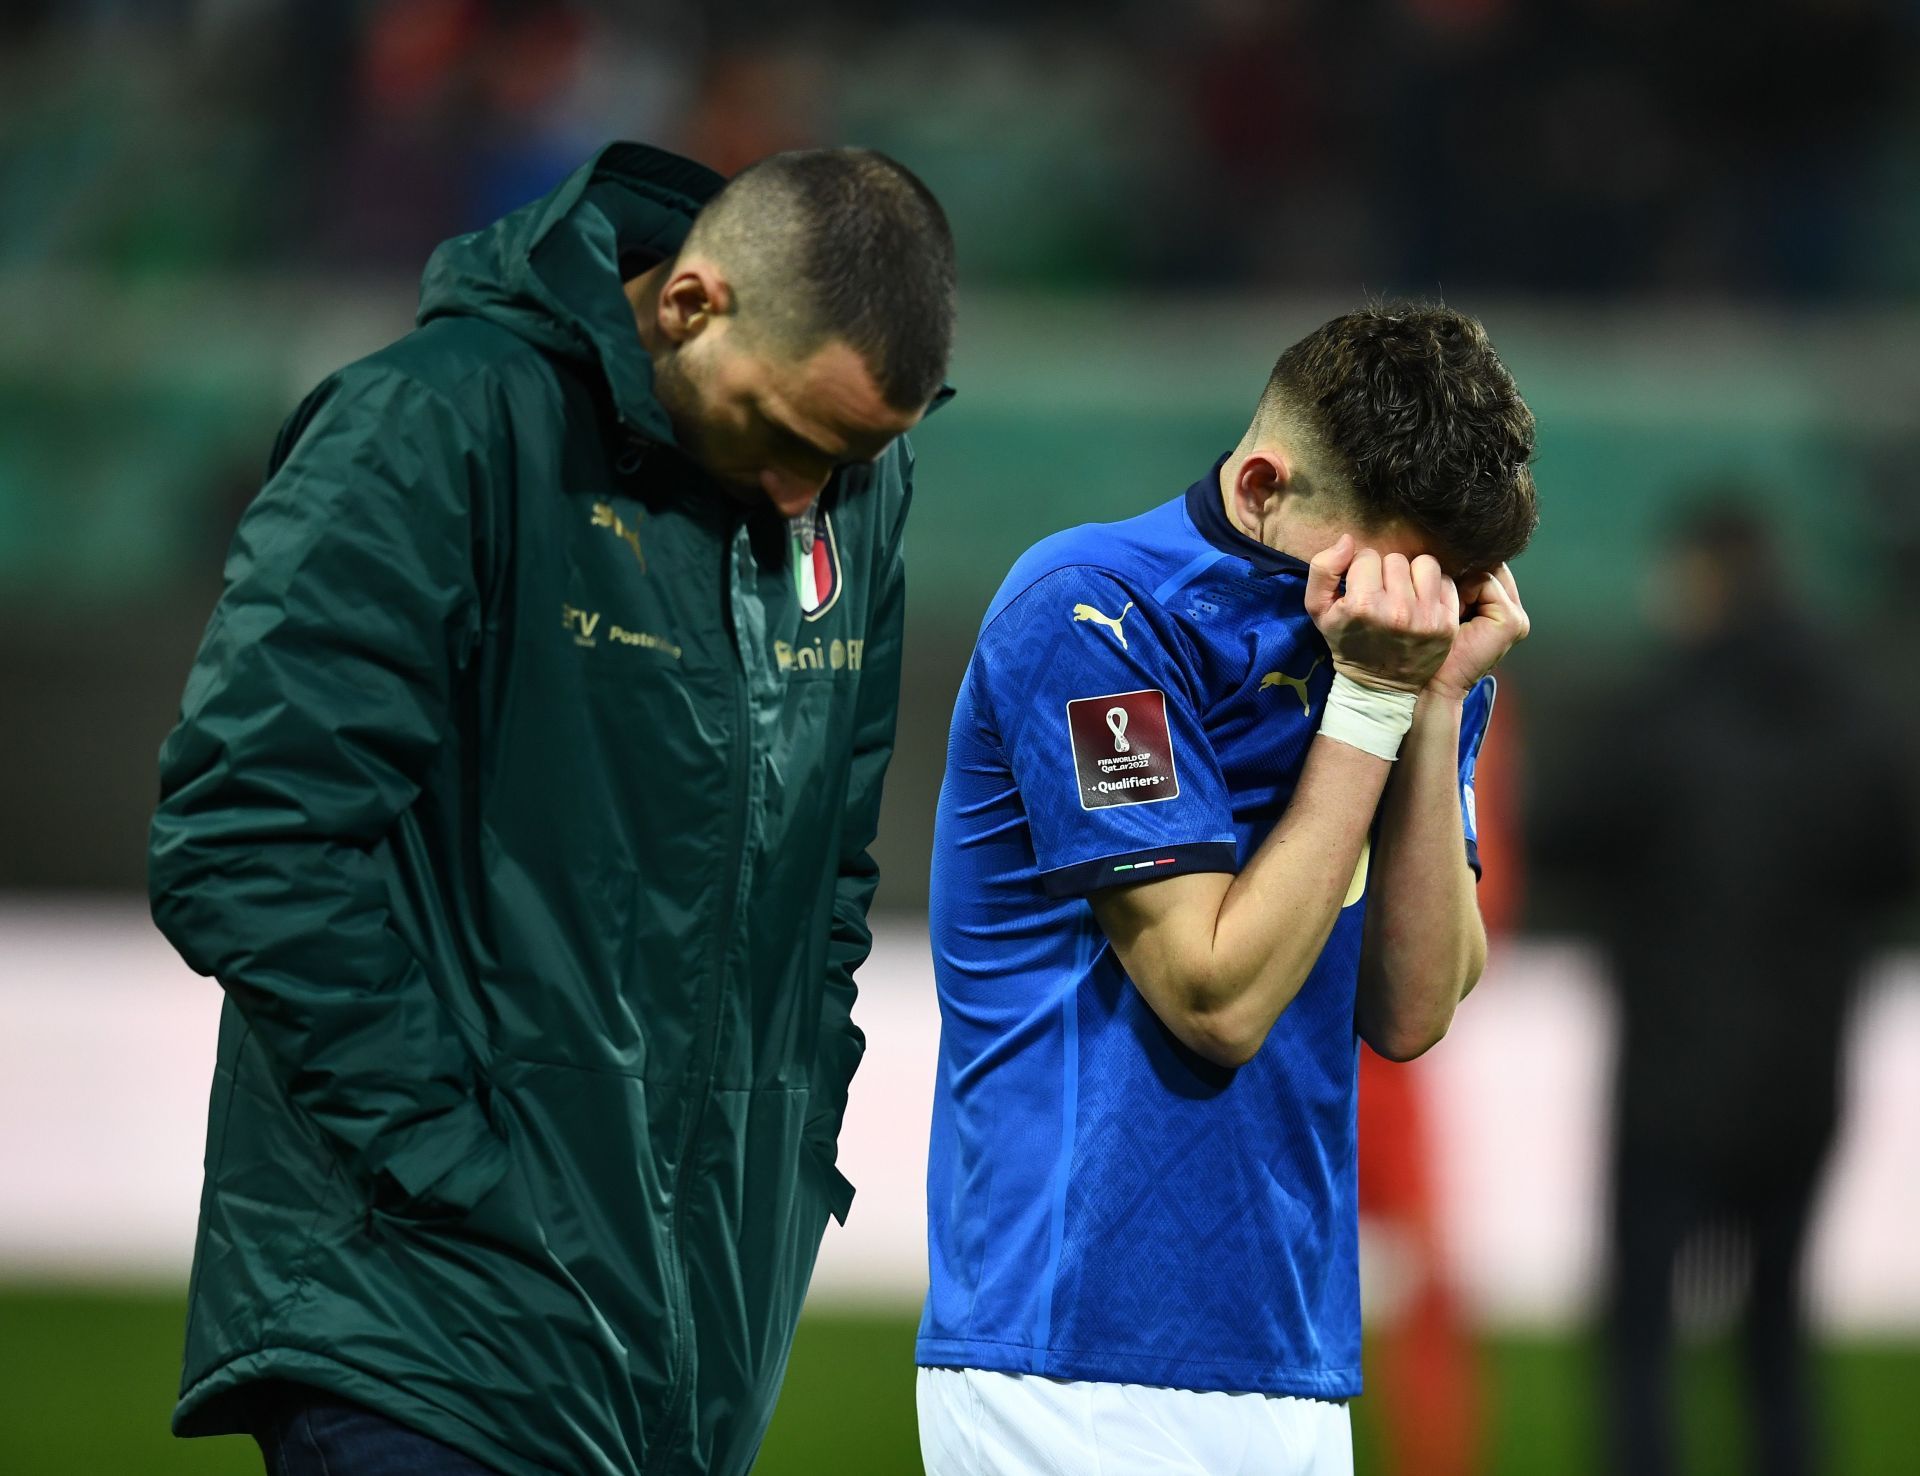 Italy have failed to qualify for consecutive FIFA World Cups